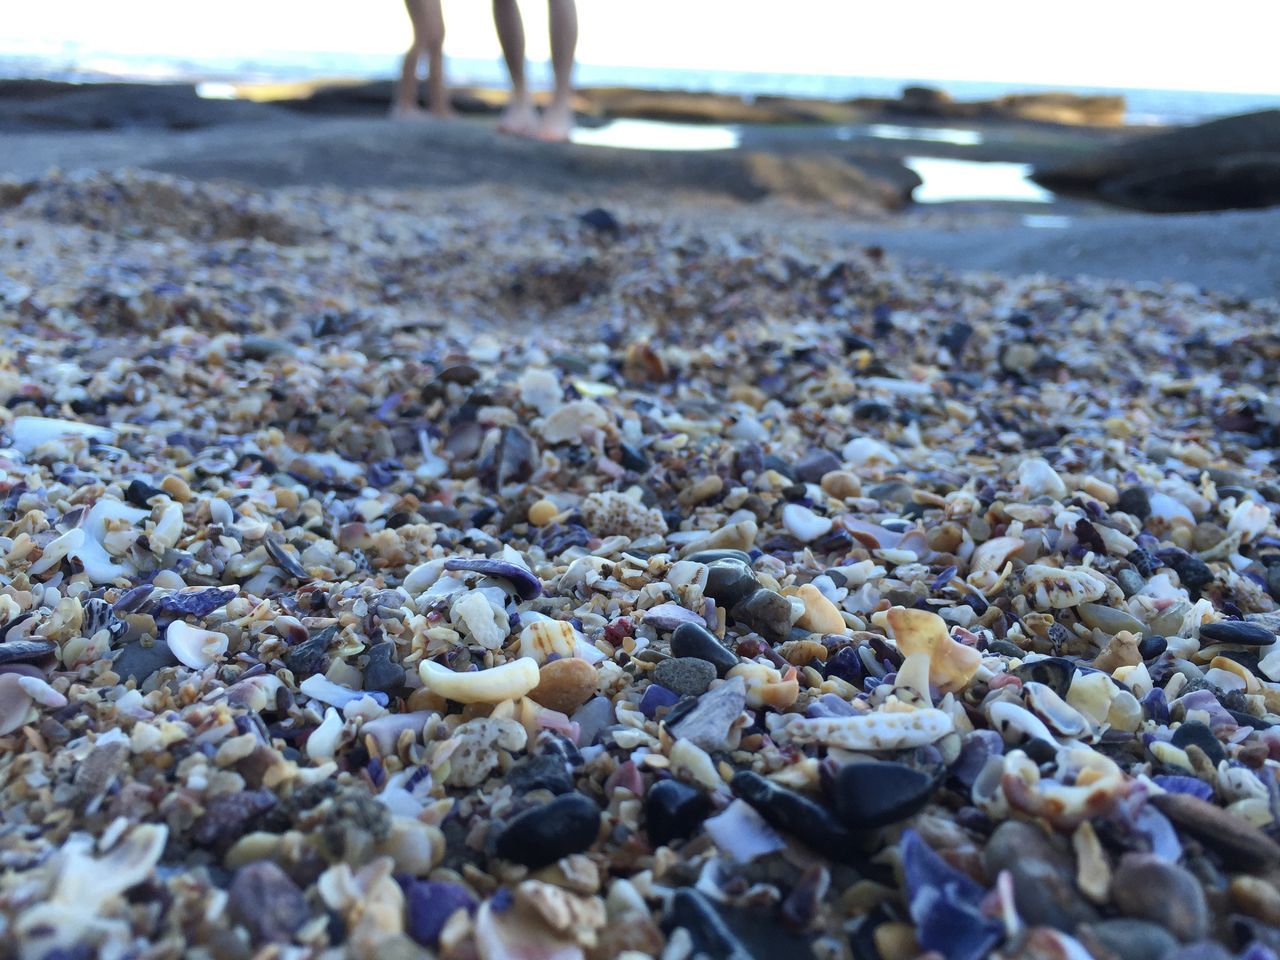 beach, pebble, sand, surface level, shore, selective focus, sea, stone - object, water, nature, seashell, focus on foreground, tranquility, stone, beauty in nature, tranquil scene, day, close-up, outdoors, sunlight